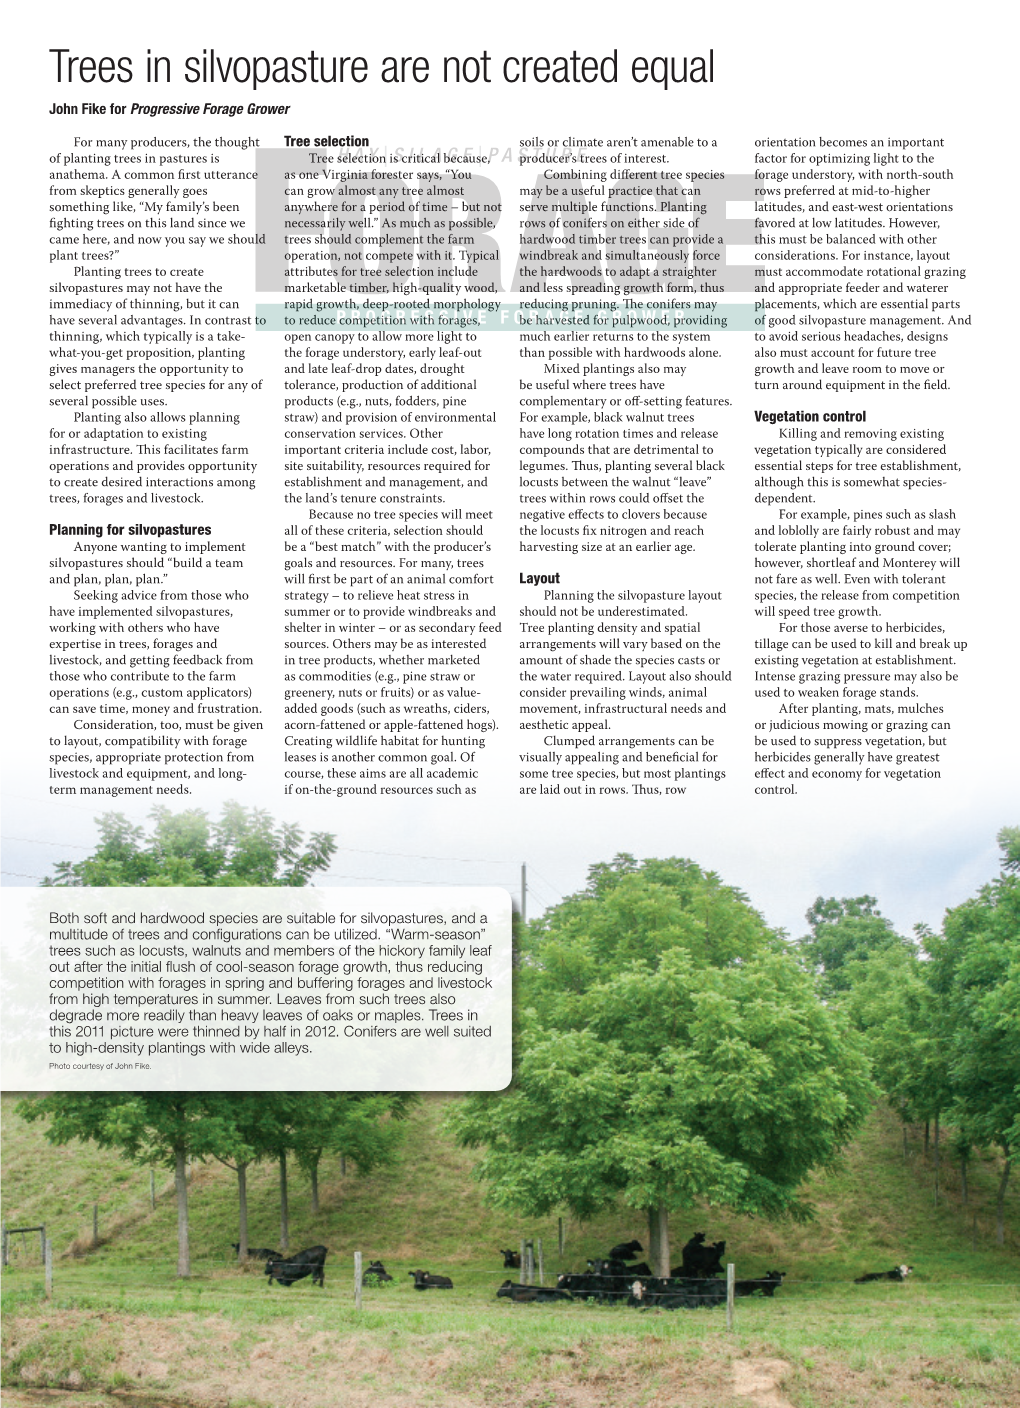 Trees in Silvopasture Are Not Created Equal John Fike for Progressive Forage Grower